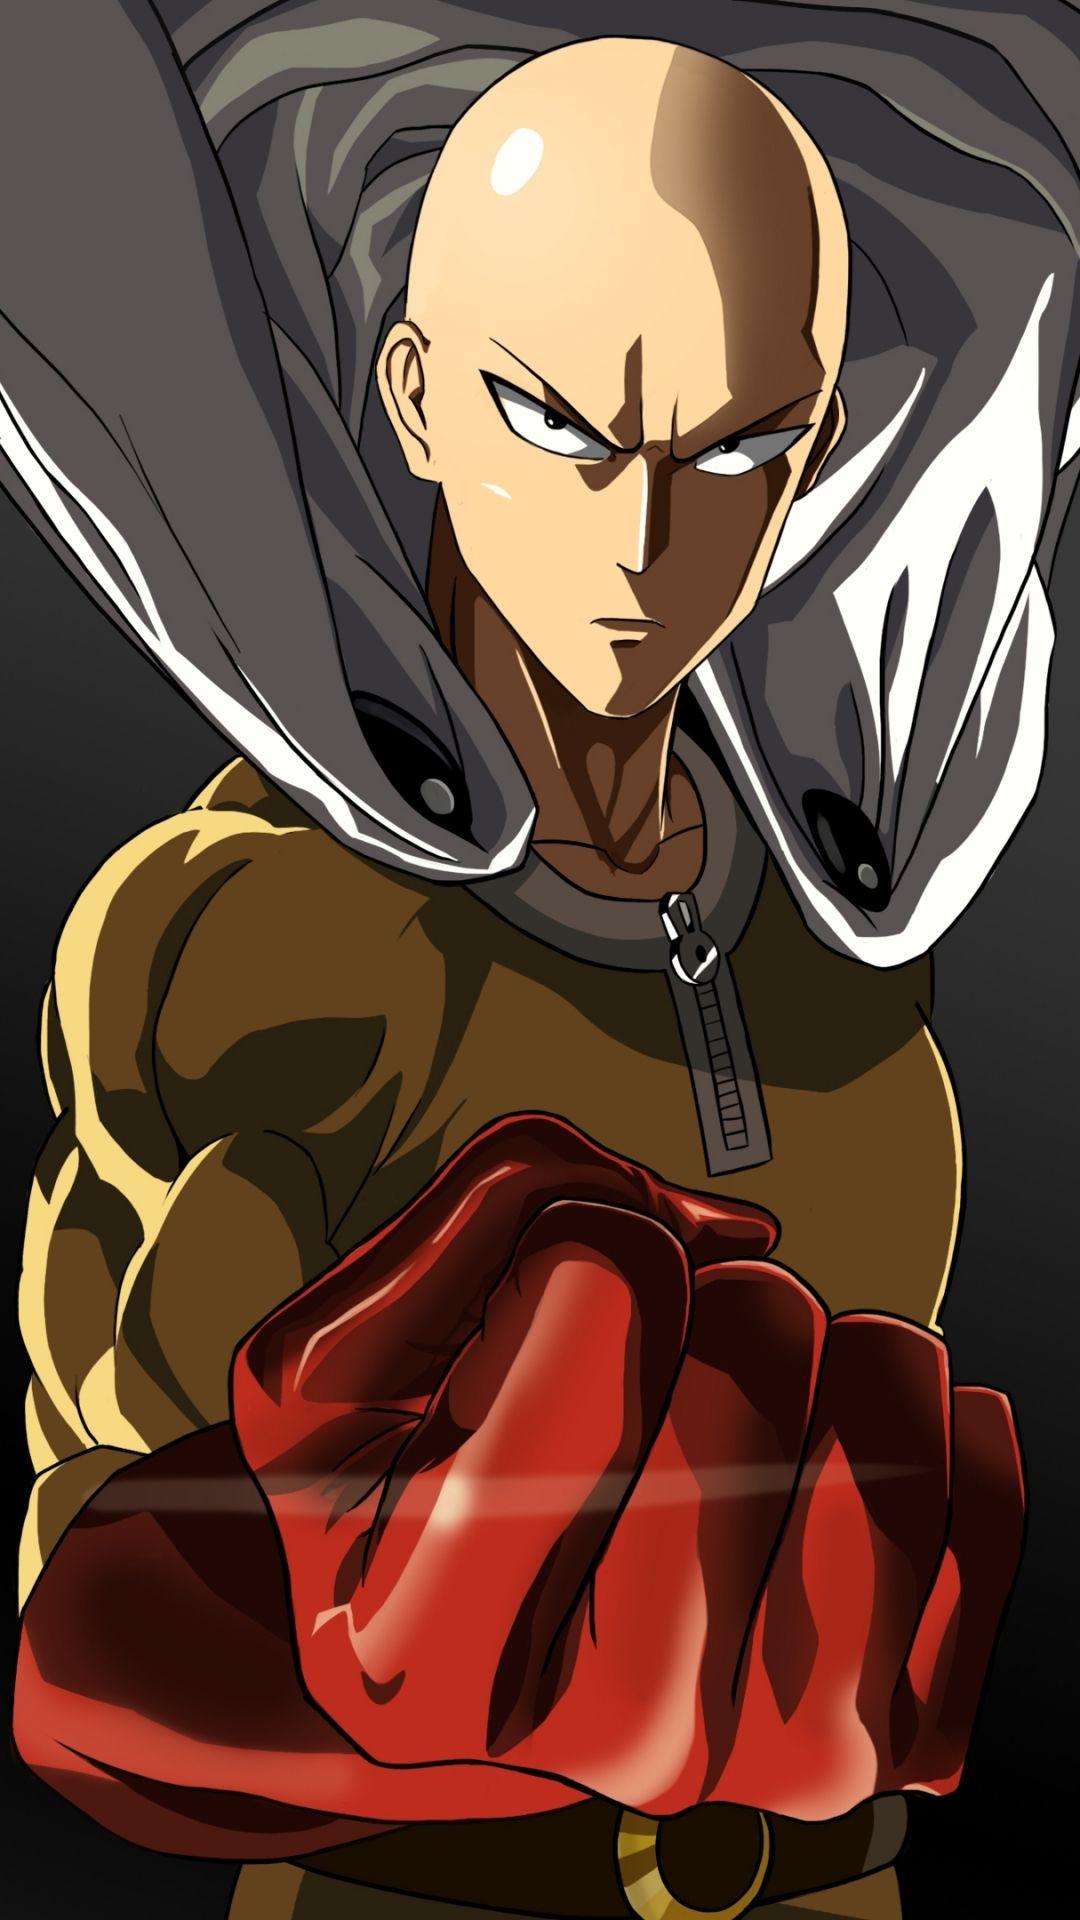 One Punch Man Wallpaper for iPhone iPhone 7 plus, iPhone 6